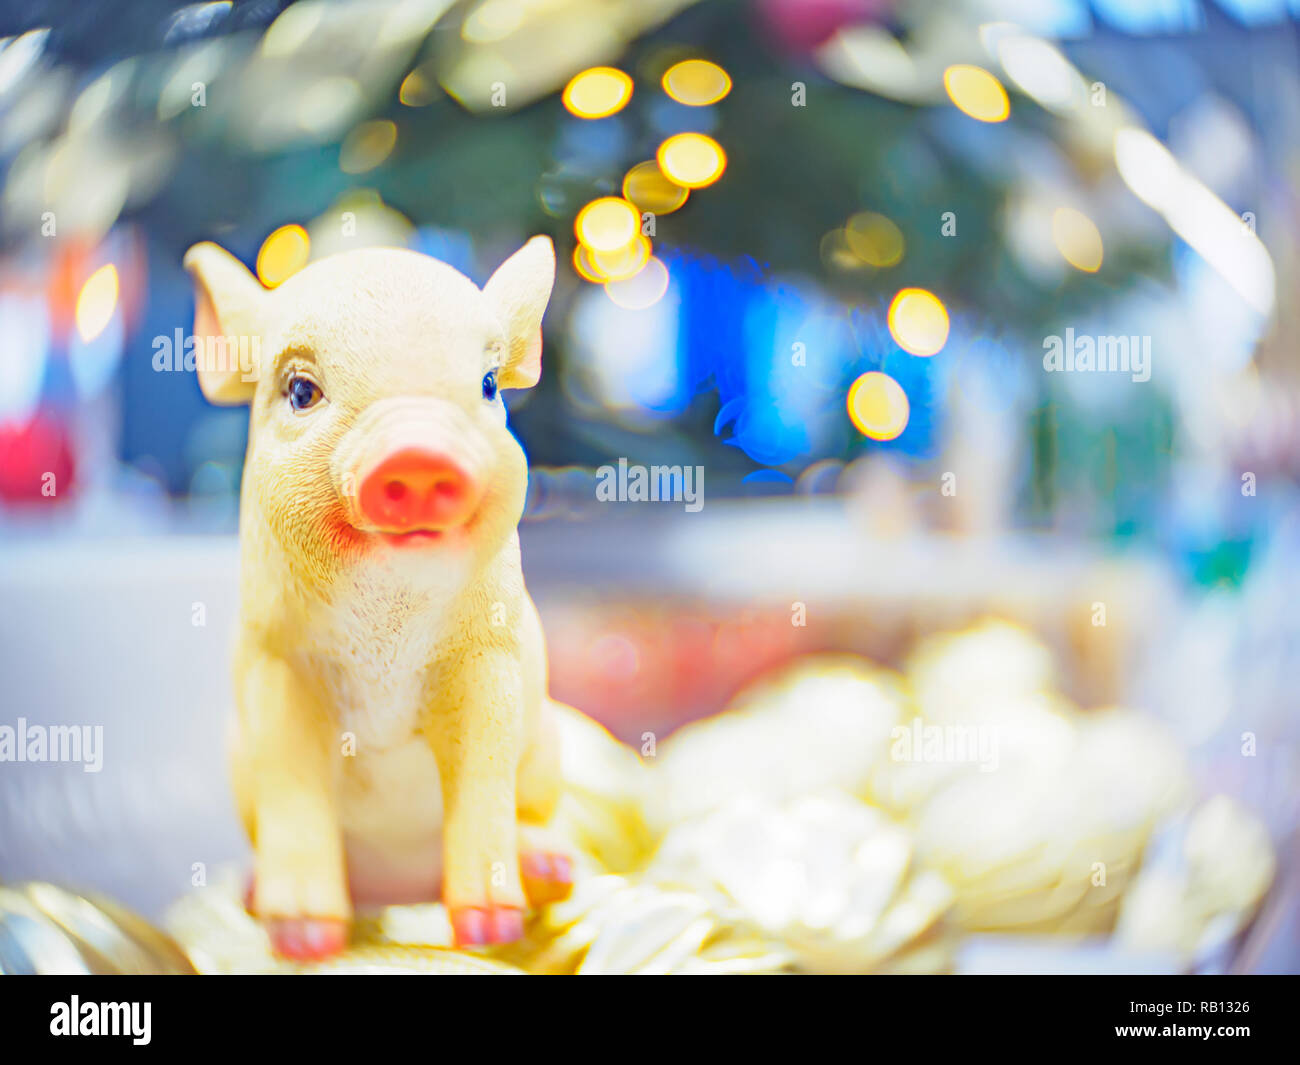 Christmas decorations and toys. Christmas and New Year festive soft-focused background with a pig as a symbol of the new year. Stock Photo